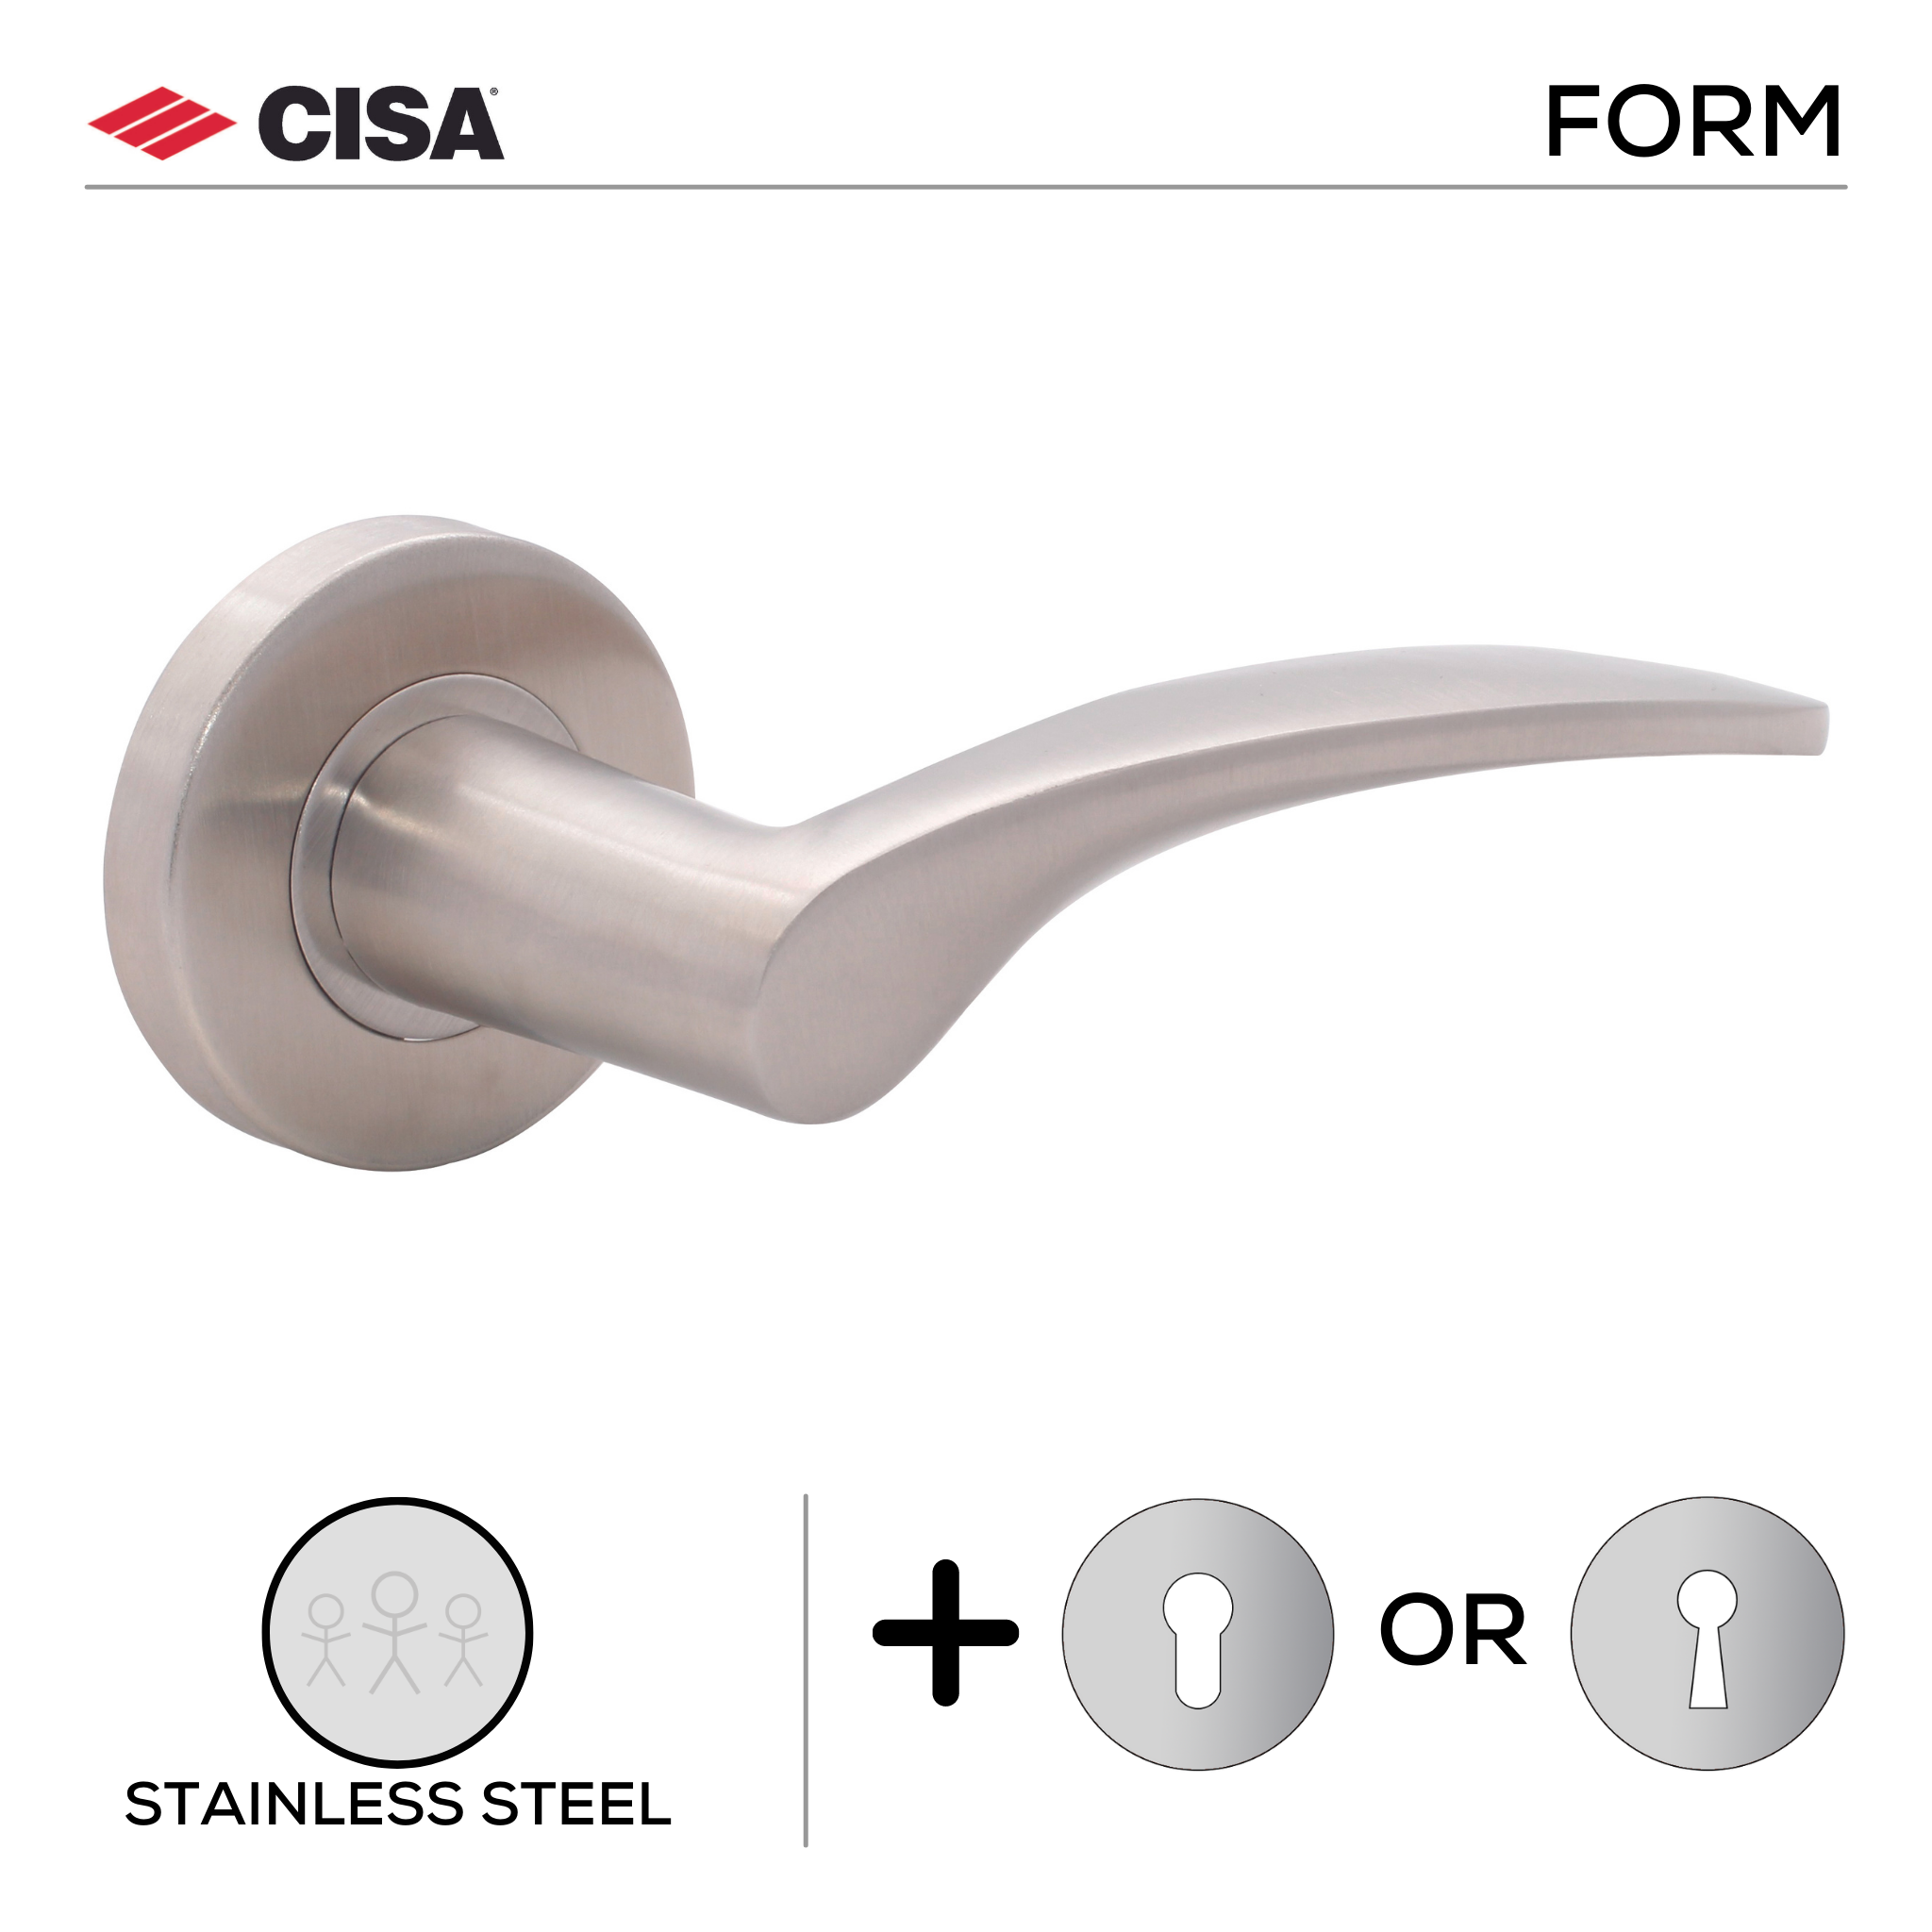 FS116.R._.SS, Lever Handles, Form, On Round Rose, With Escutcheons, Stainless Steel, CISA